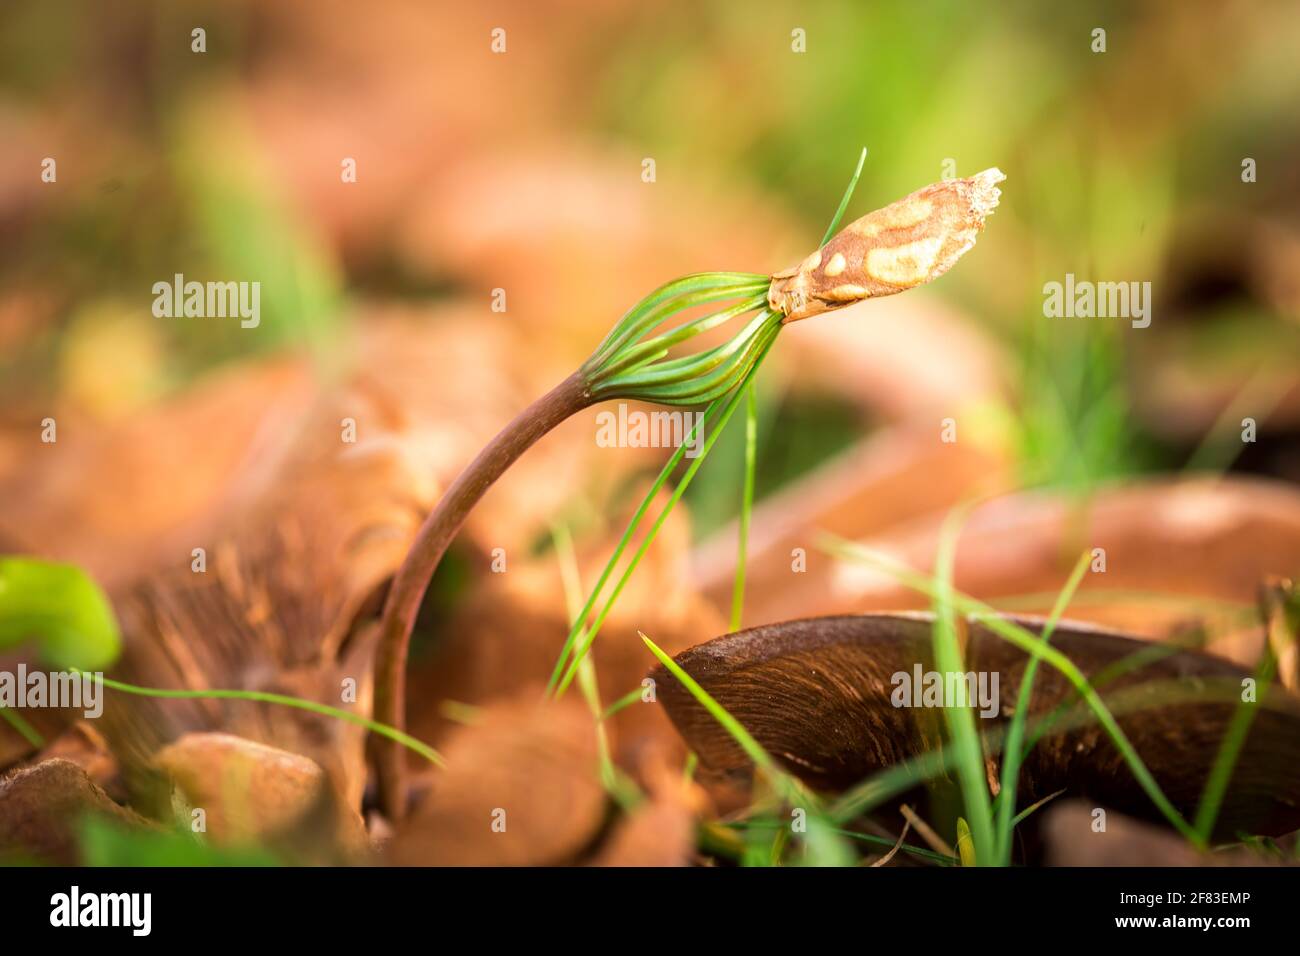 Newly sprouted young pine trees Stock Photo